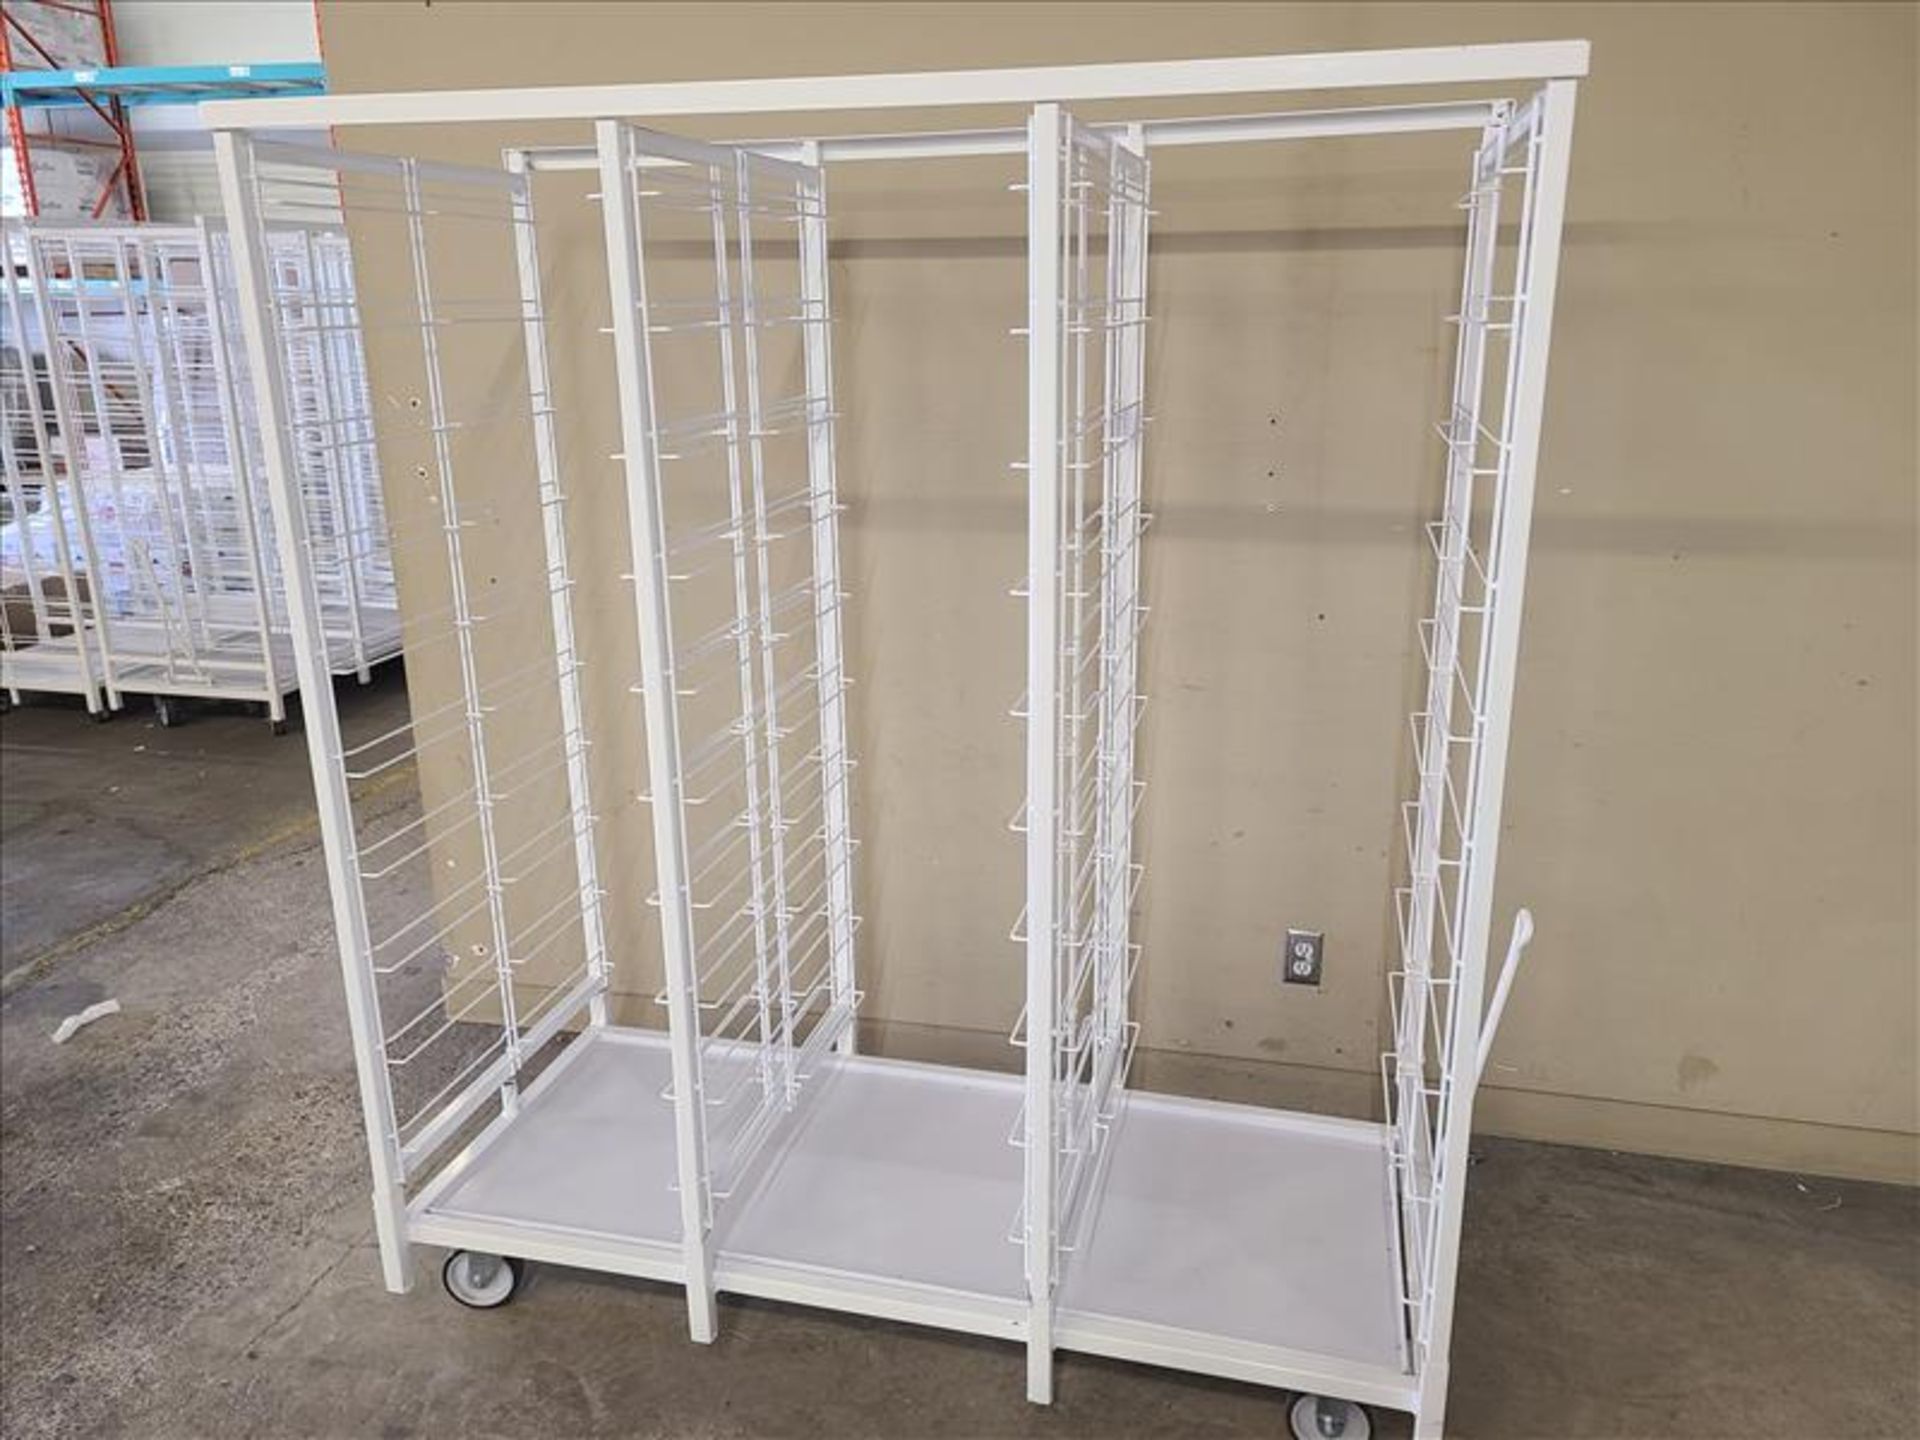 NEW VRE integrated plant production/tray drying racks, mod. DRYMAX30, 25.5 in. x 62 in. x 72 in. - Image 2 of 2